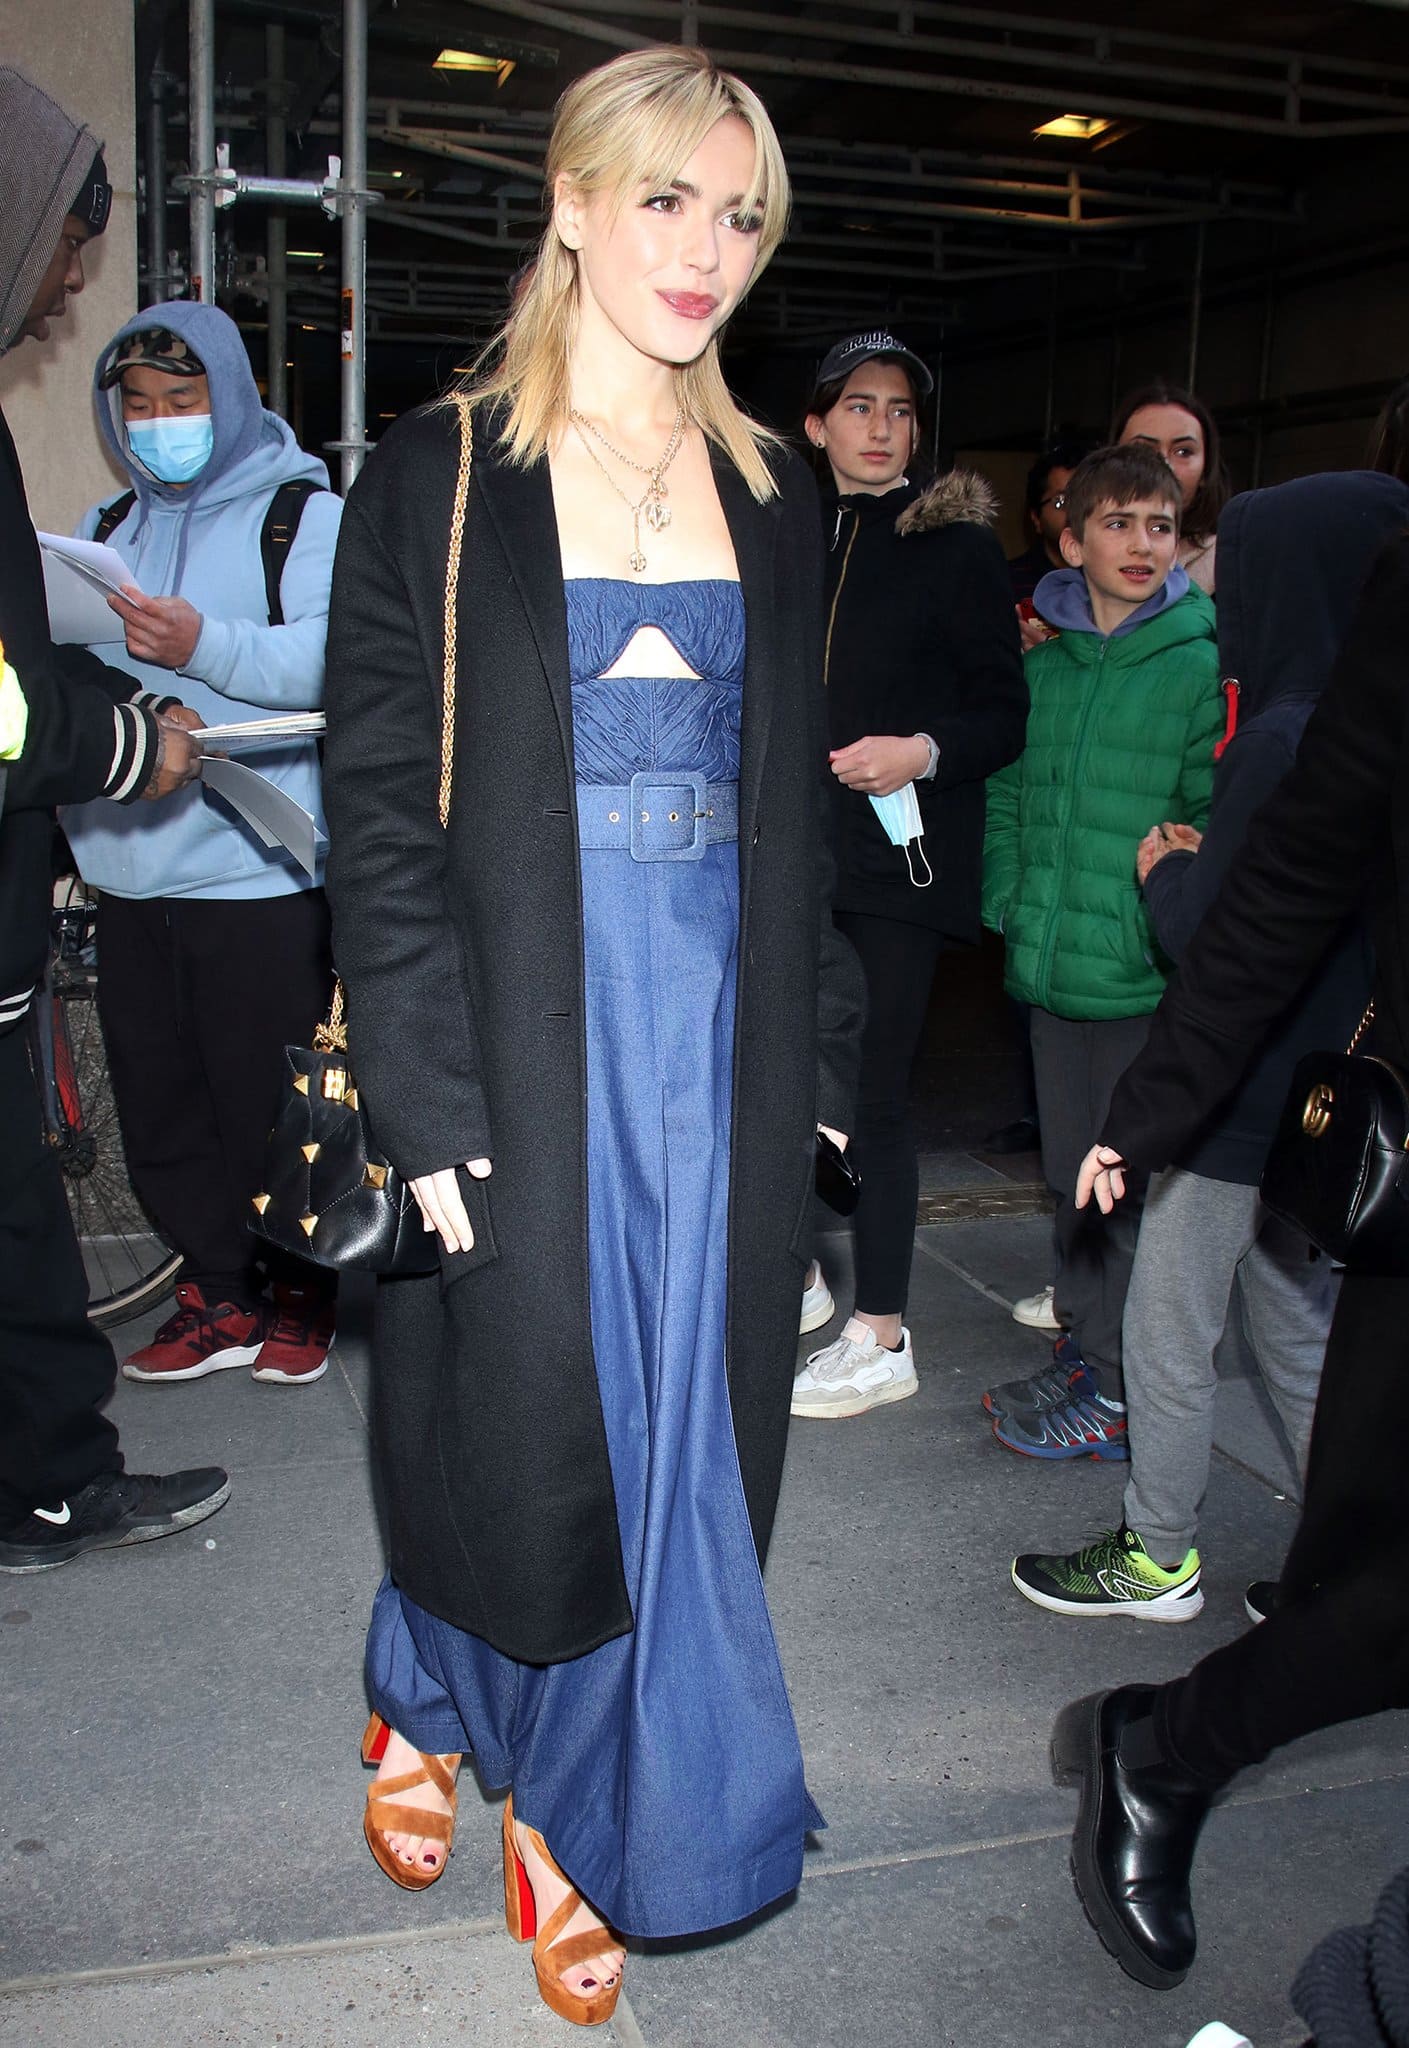 Kiernan Shipka arriving at The Today Show in a blue maxi dress with a black trench coat on April 28, 2022